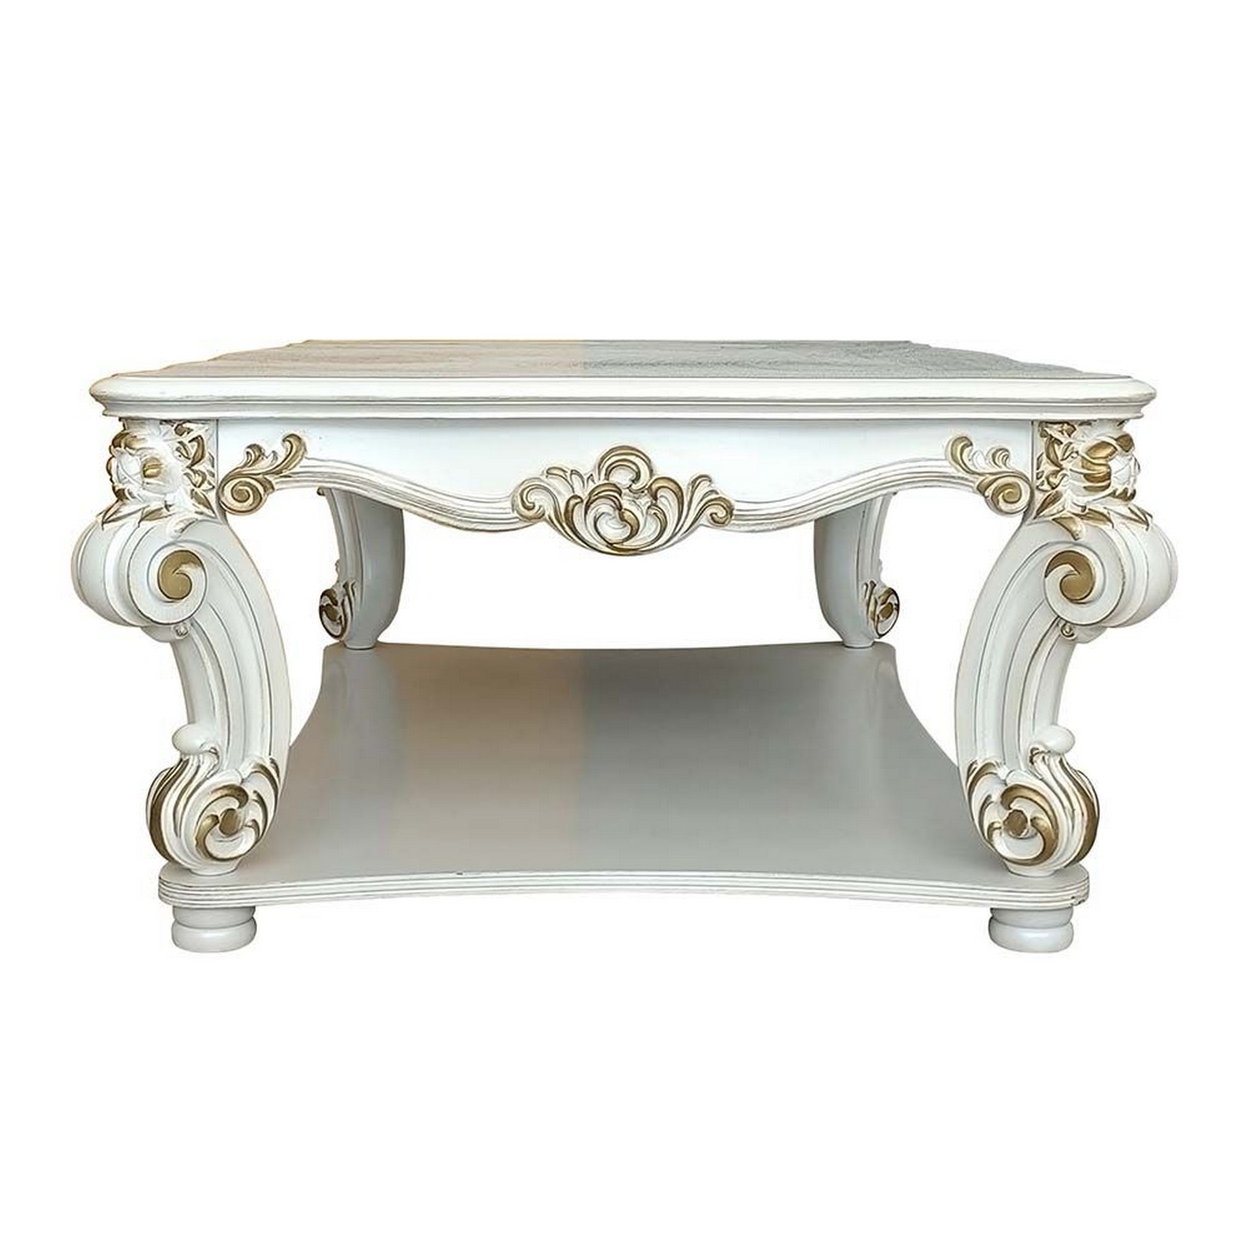 Jess 58 Inch Coffee Table, Traditional Scrolled Legs, White, Brushed Gold - Saltoro Sherpi